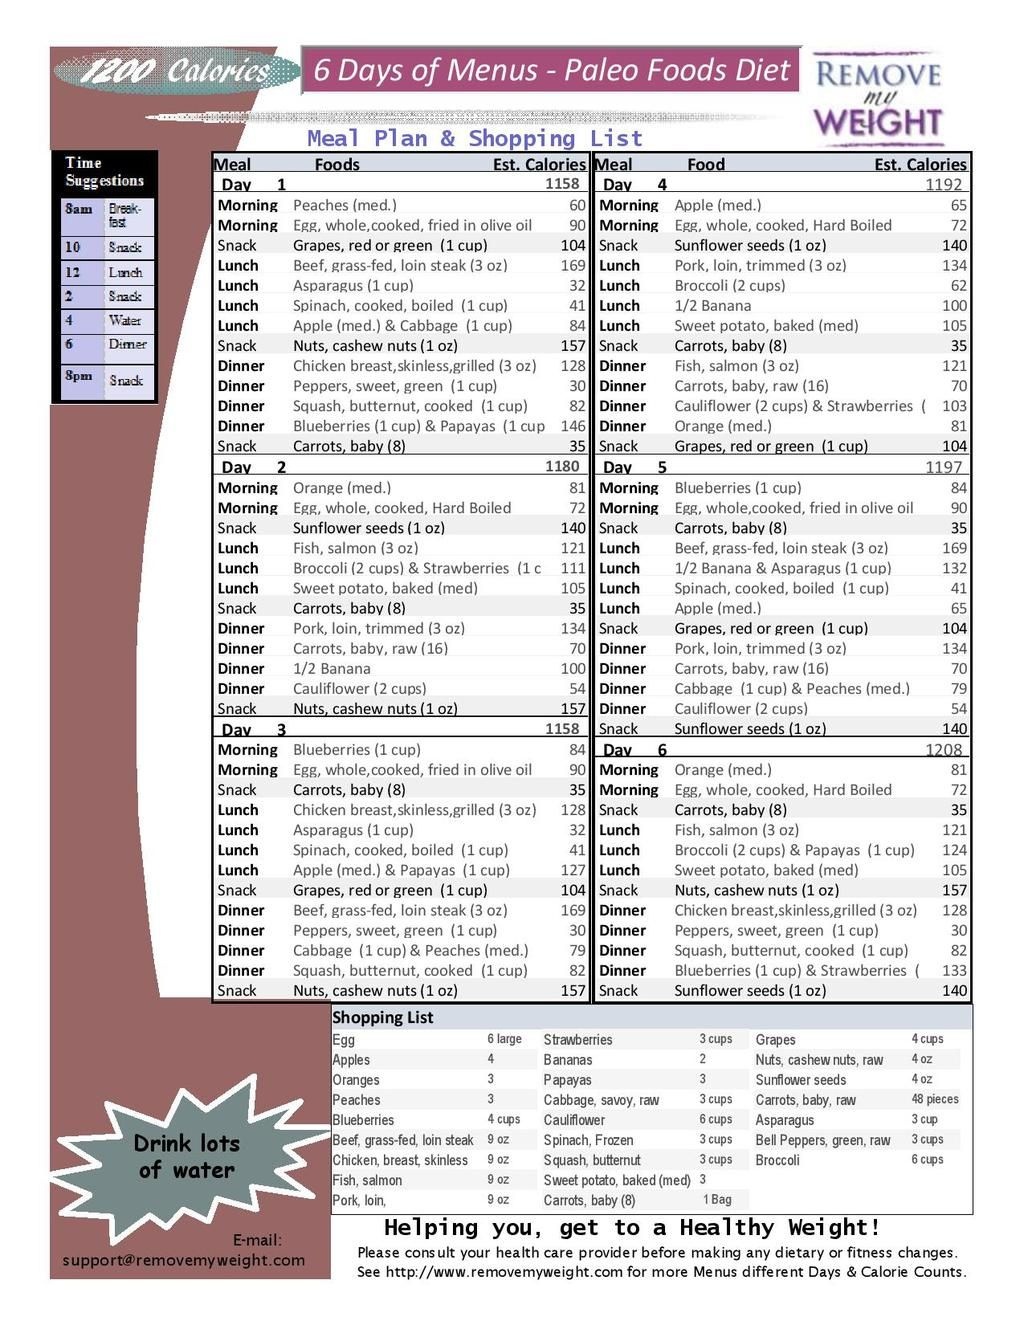 1200 Calorie A Day, Paleo Diet, 6 Day Menu Plan With Shopping List - Free Printable 1200 Calorie Diet Menu